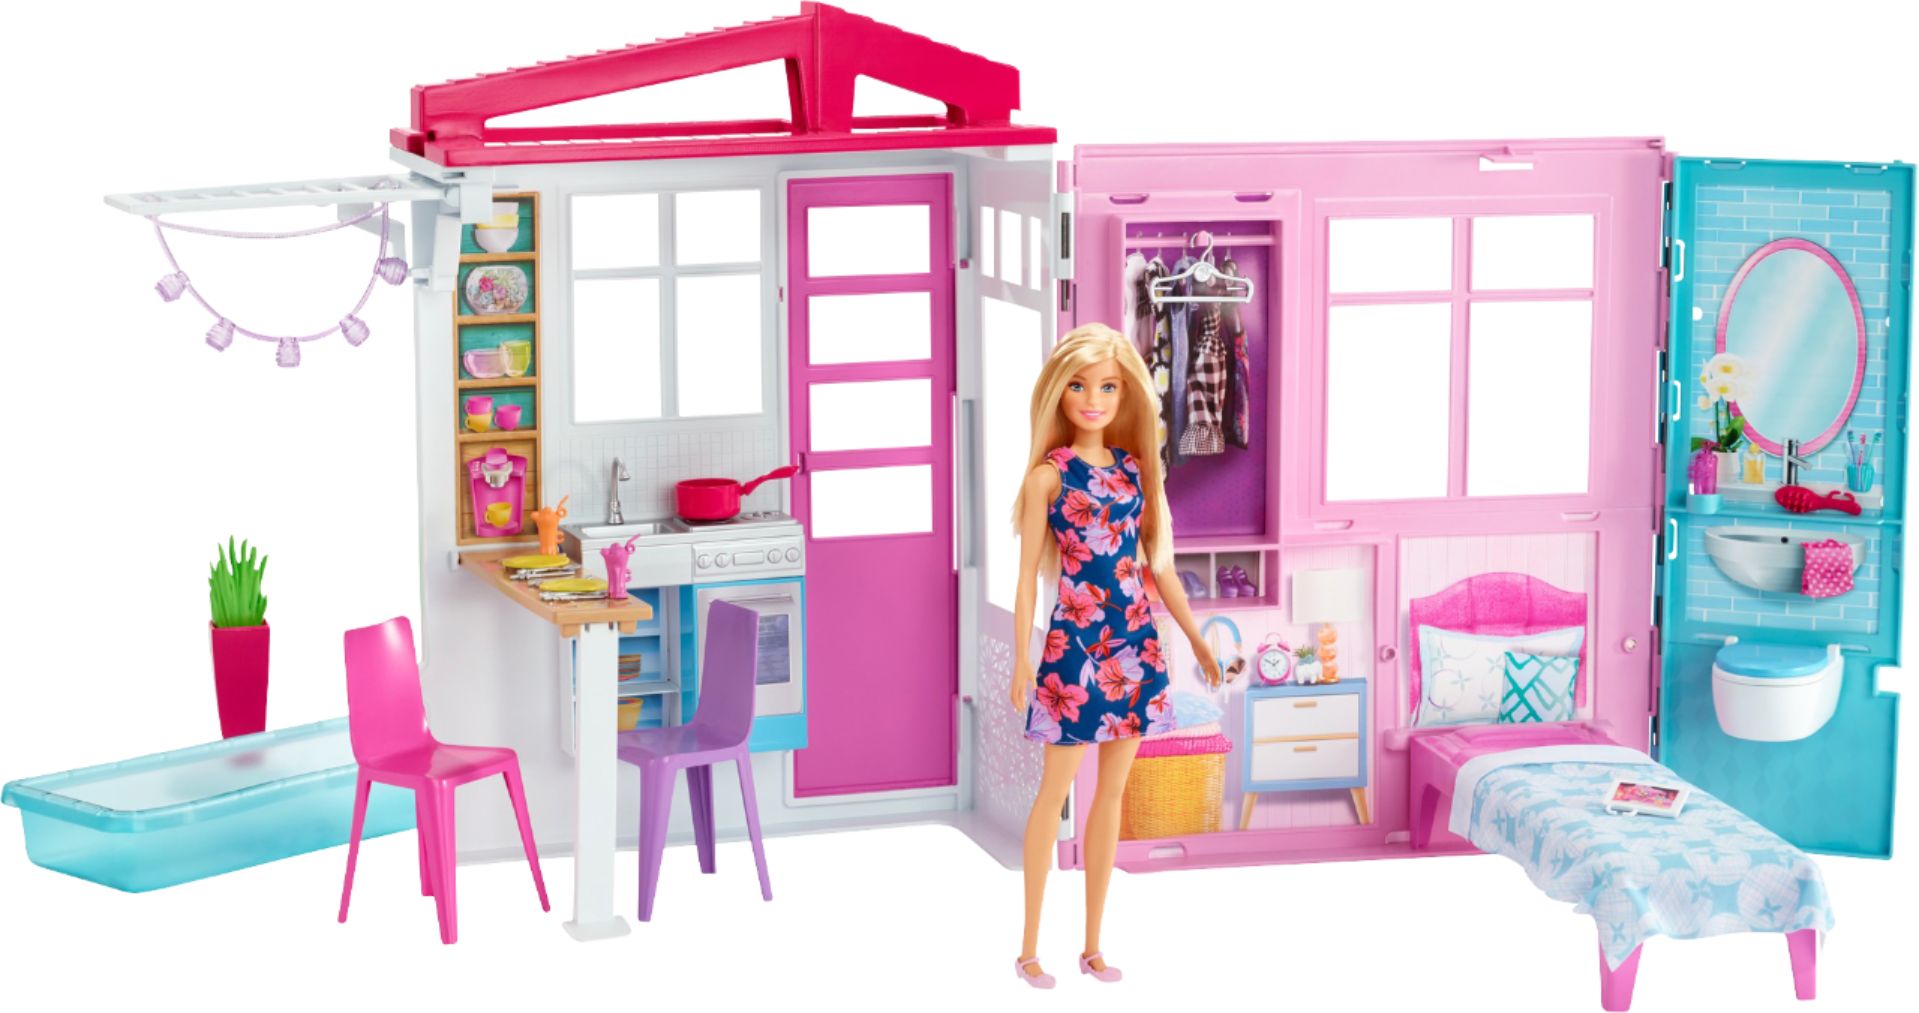 Barbie House And Doll Fxg55 Best Buy,Moon Flowers Tattoo